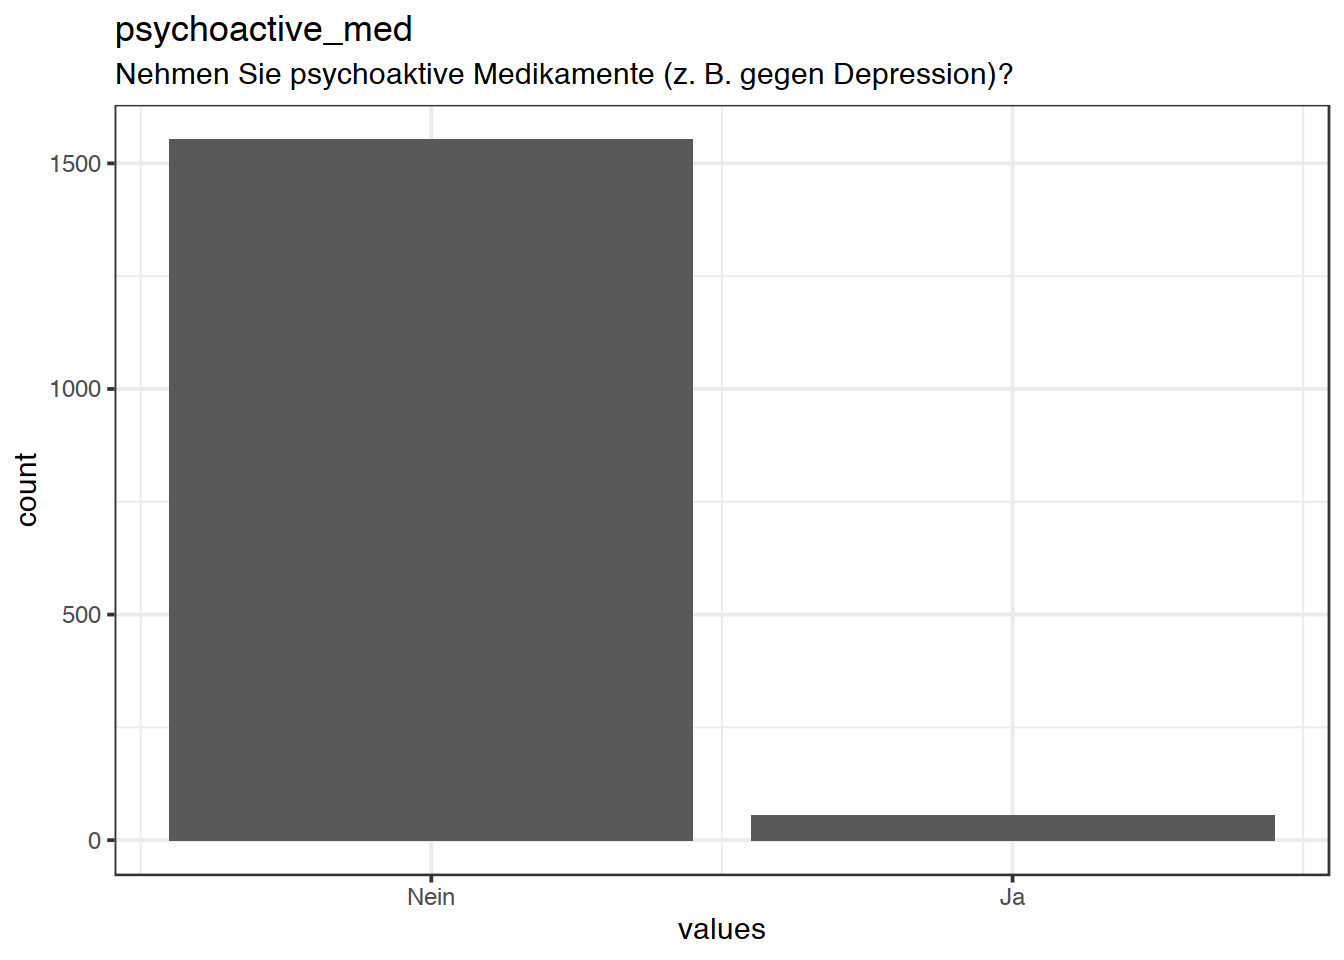 Distribution of values for psychoactive_med